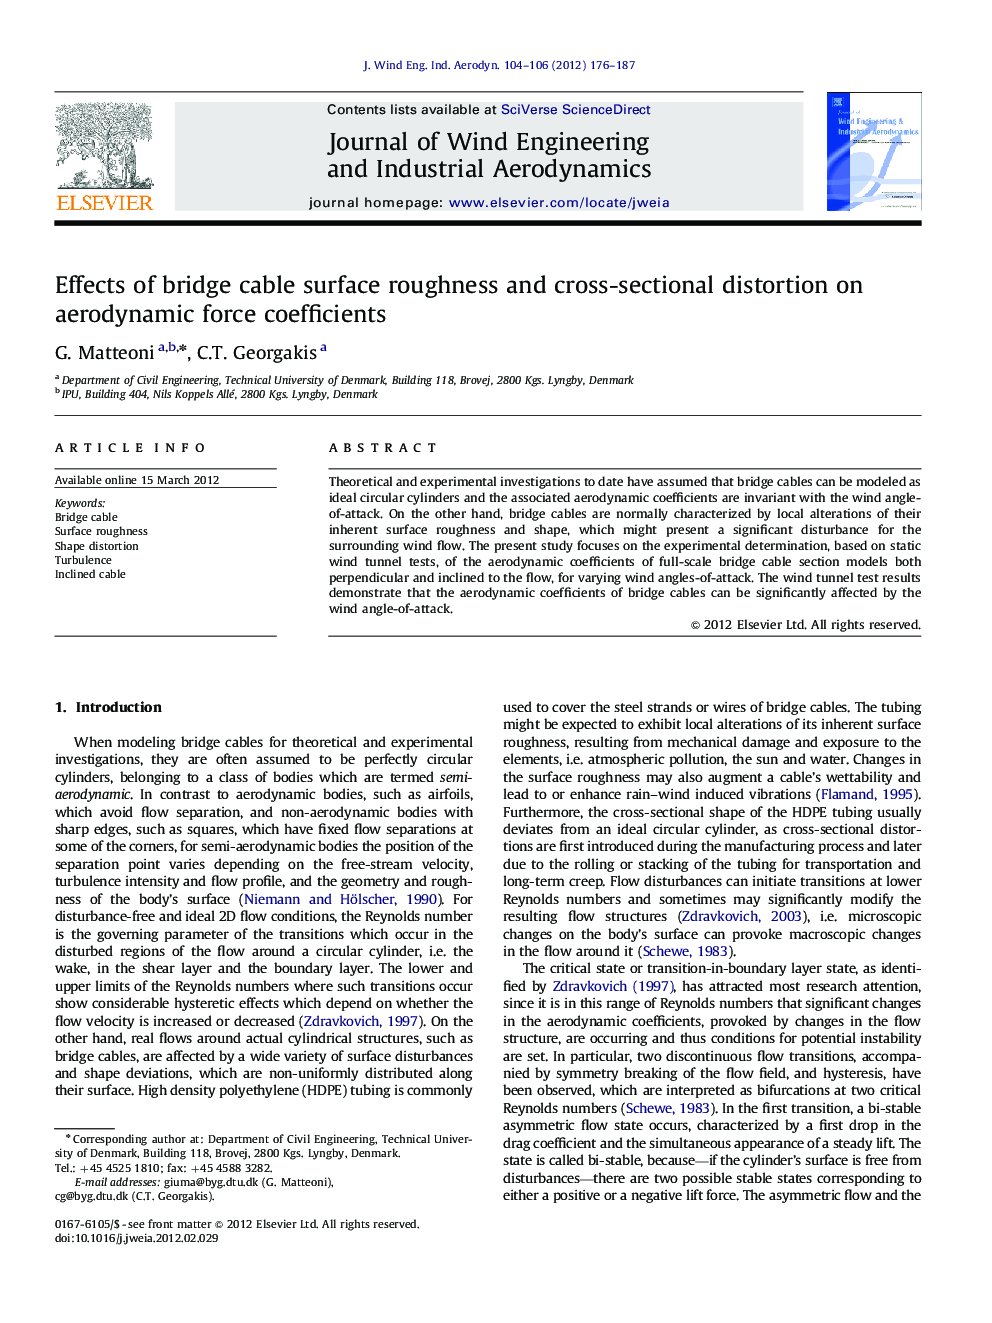 Effects of bridge cable surface roughness and cross-sectional distortion on aerodynamic force coefficients